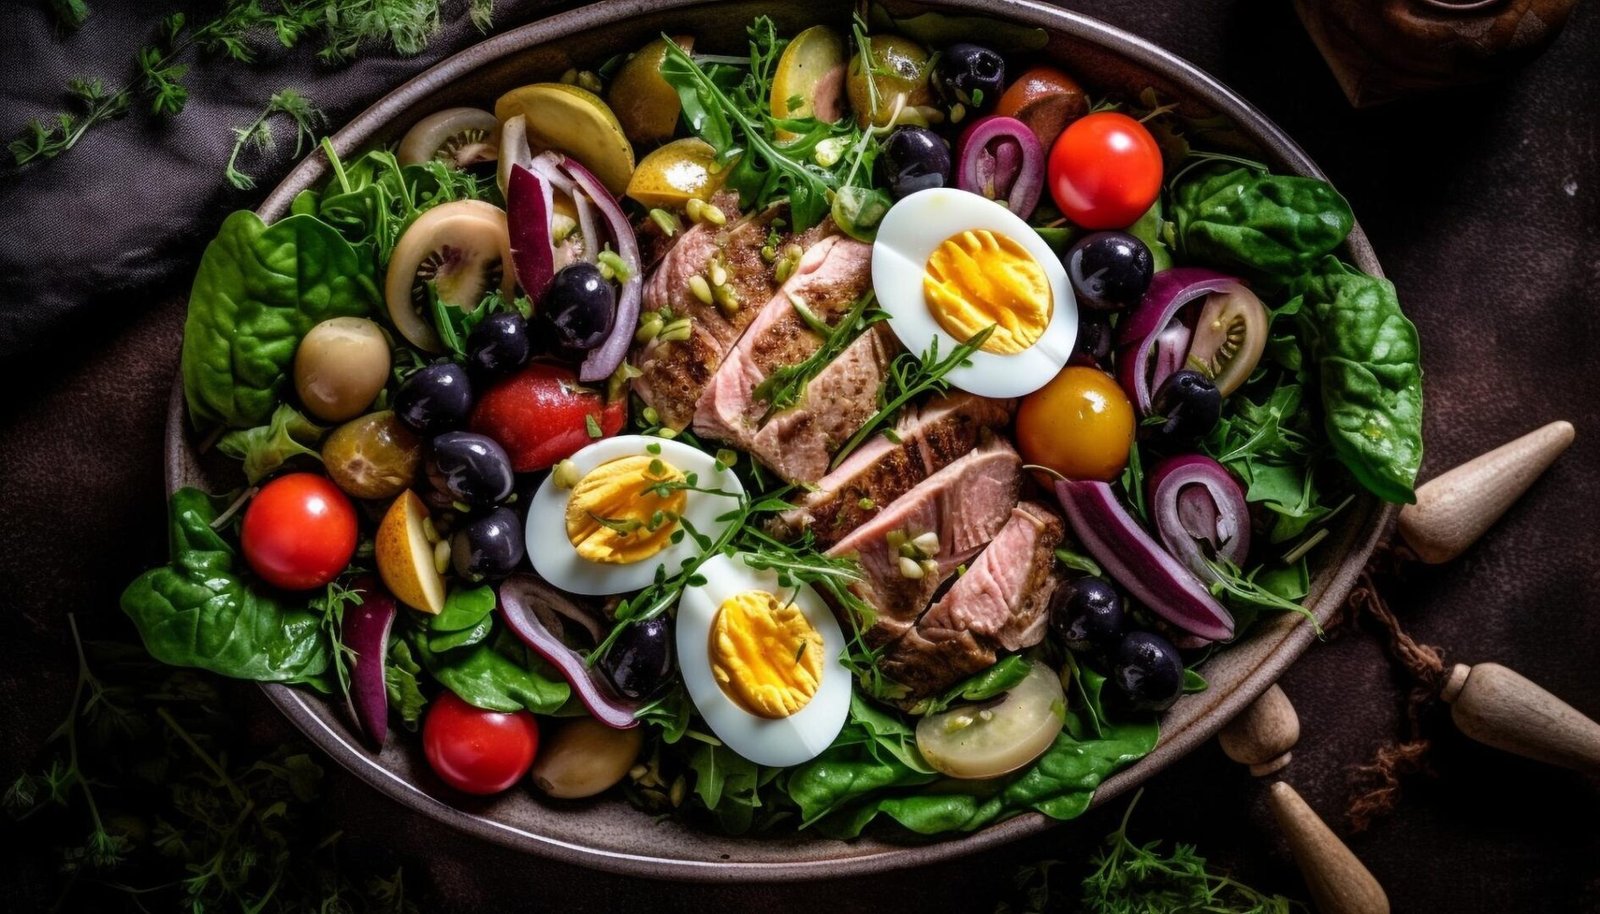 A grilled steak salad, featuring beef, hard boiled eggs, mushrooms, and greens. Suitable for a ketogenic diet.